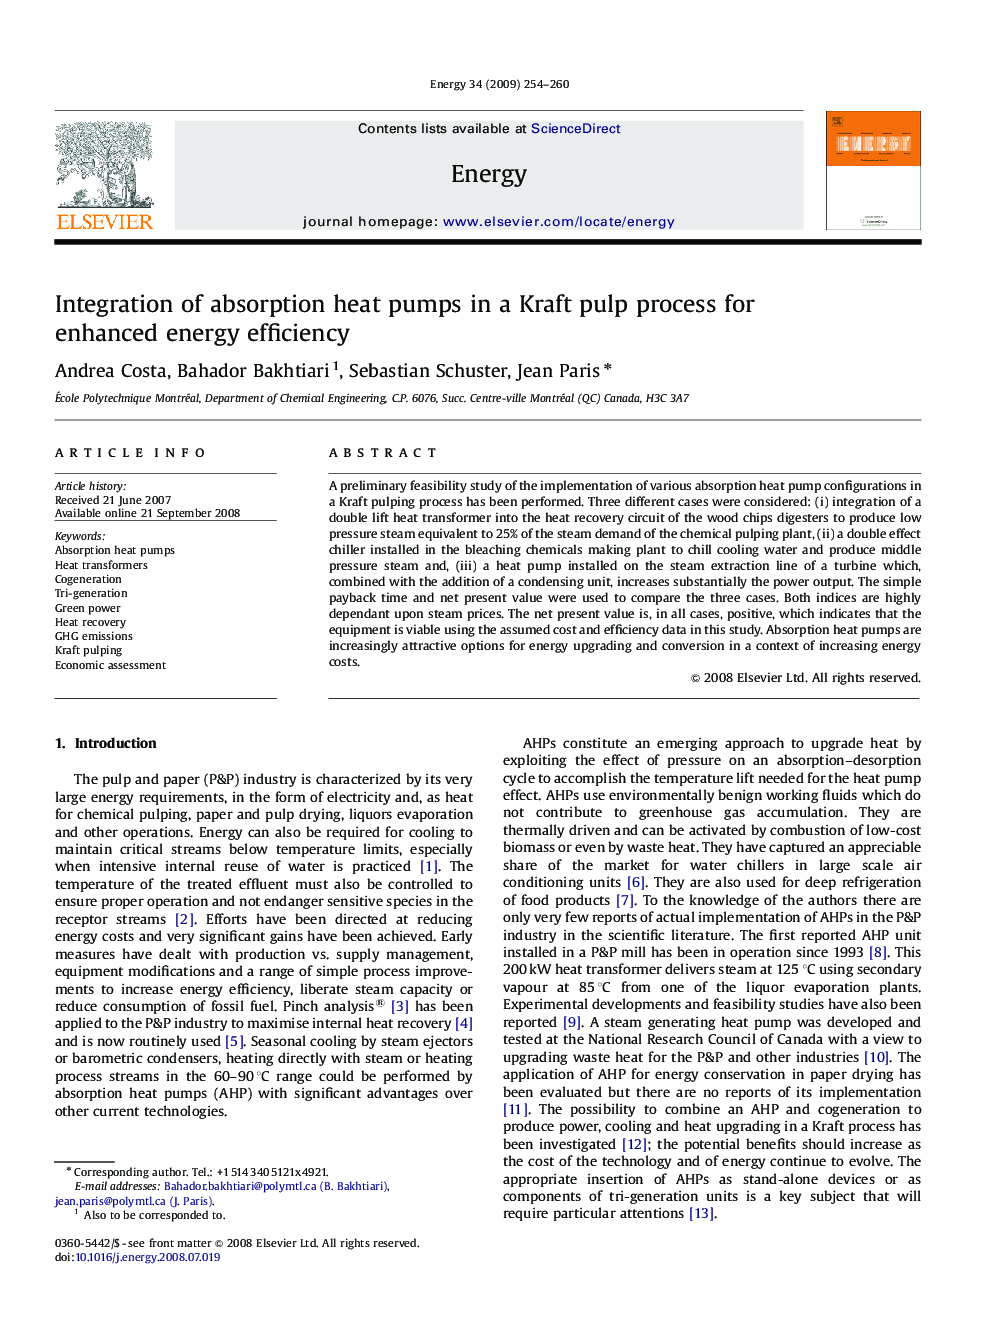 Integration of absorption heat pumps in a Kraft pulp process for enhanced energy efficiency